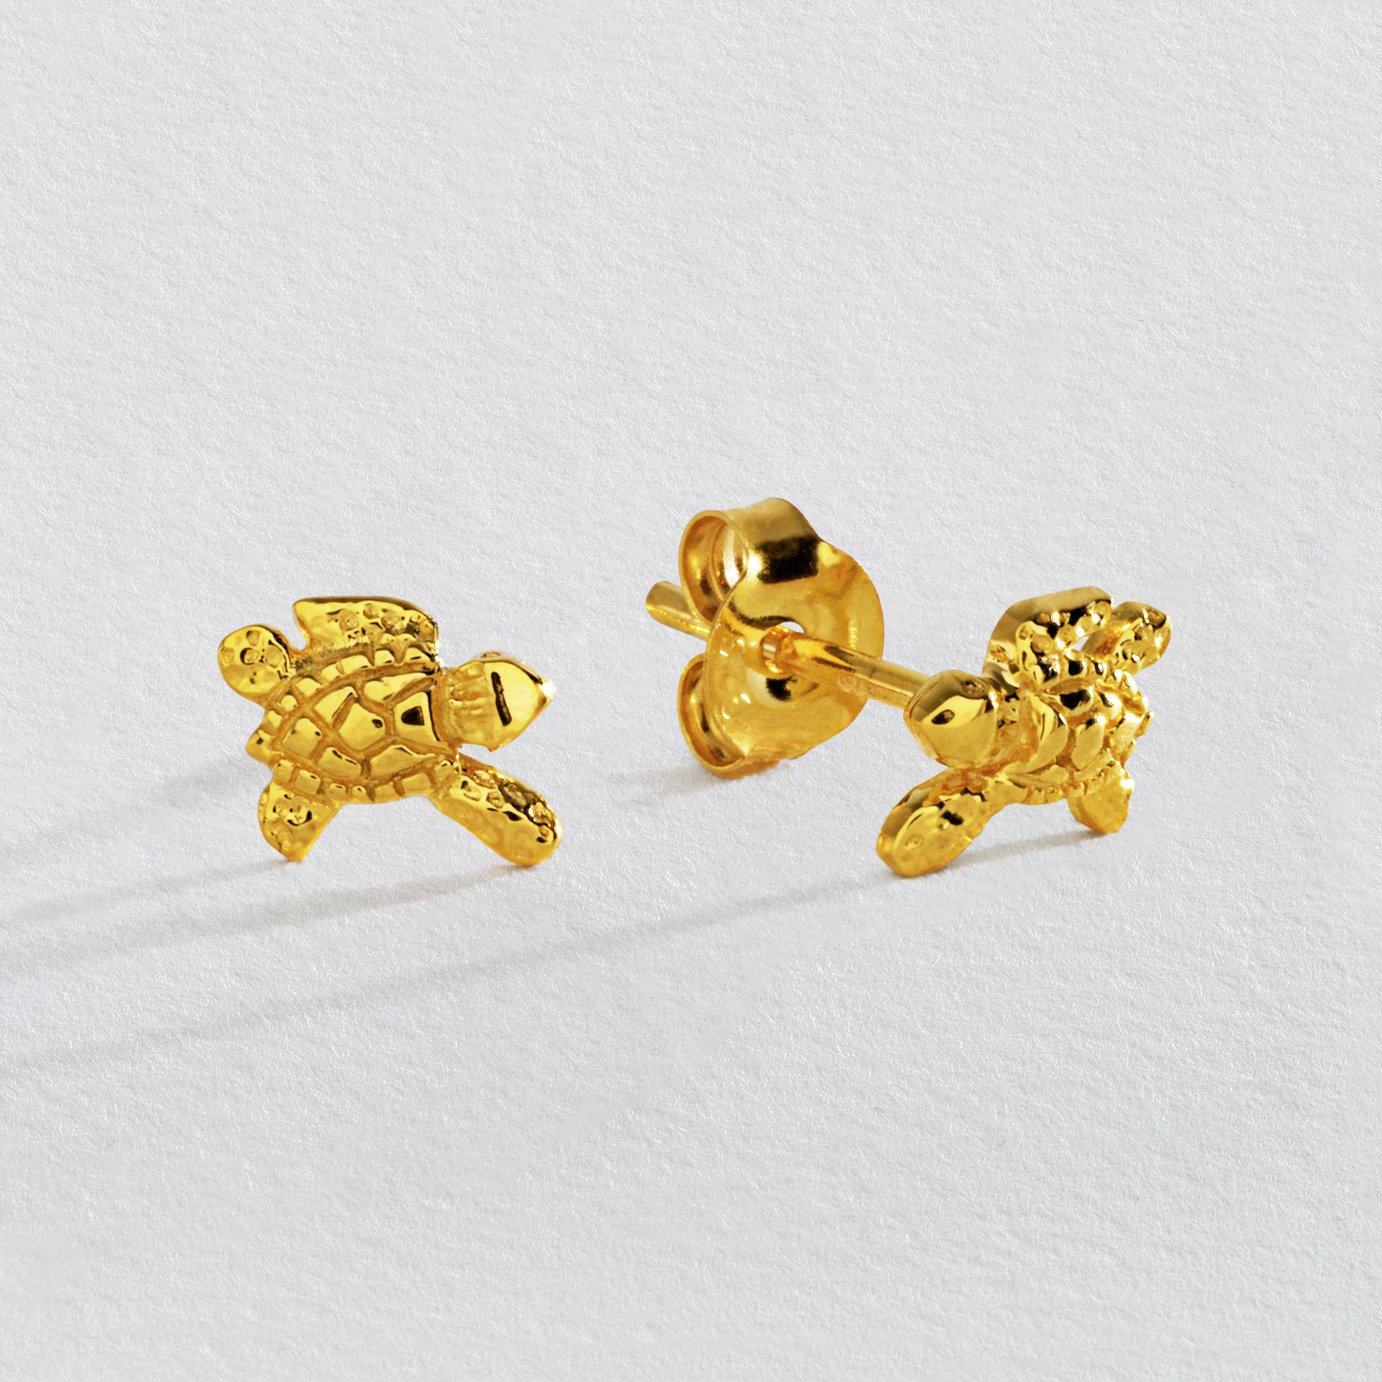 Revere Sterling Silver Gold Plated Turtle Earrings